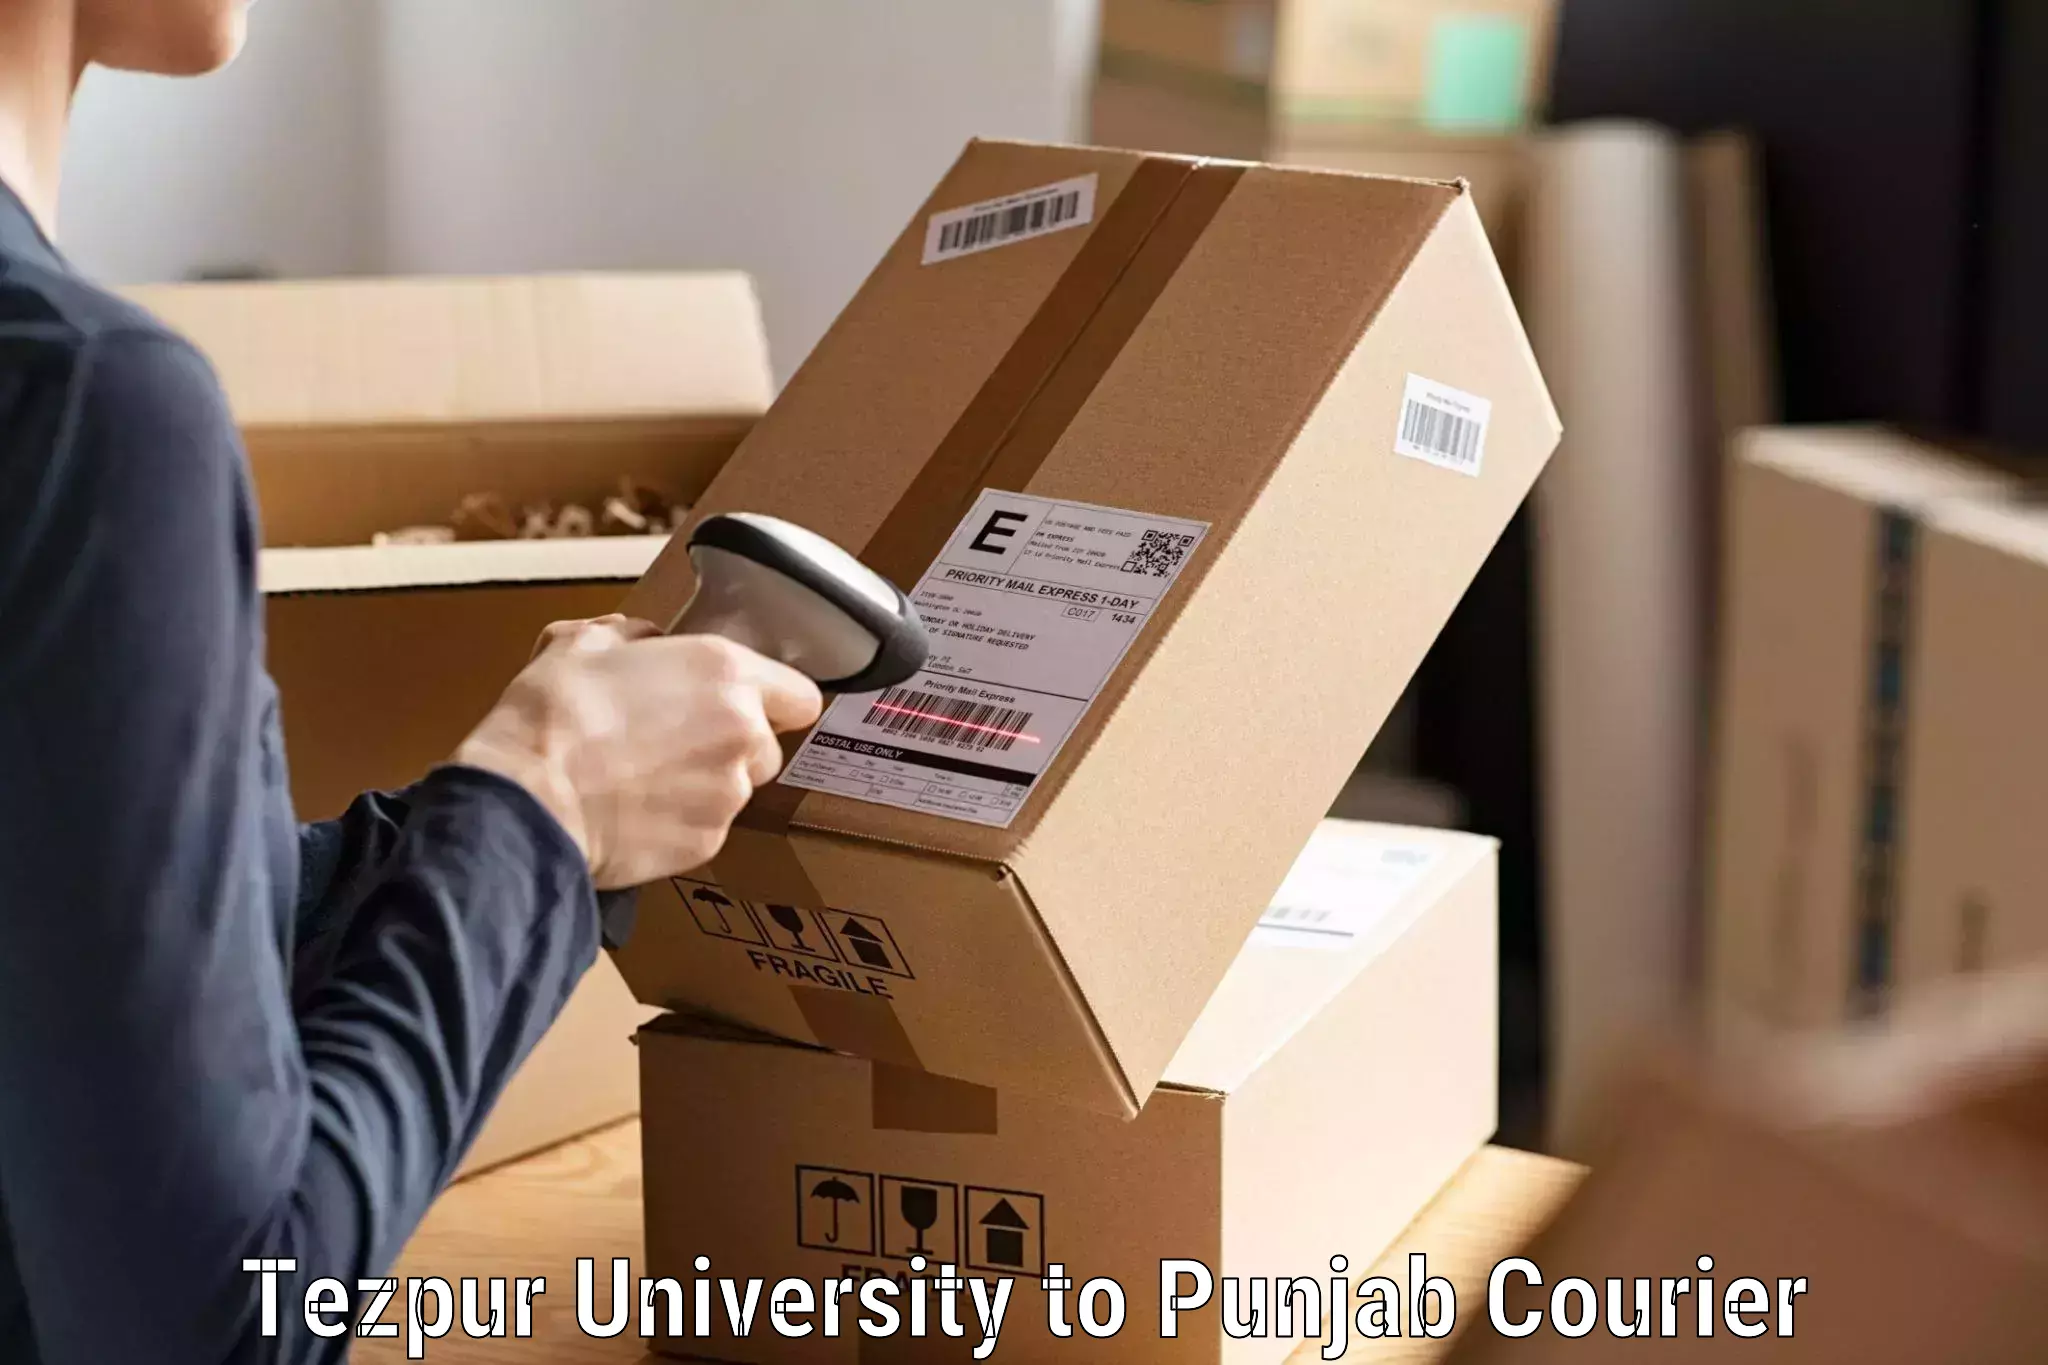 24-hour delivery options Tezpur University to Batala